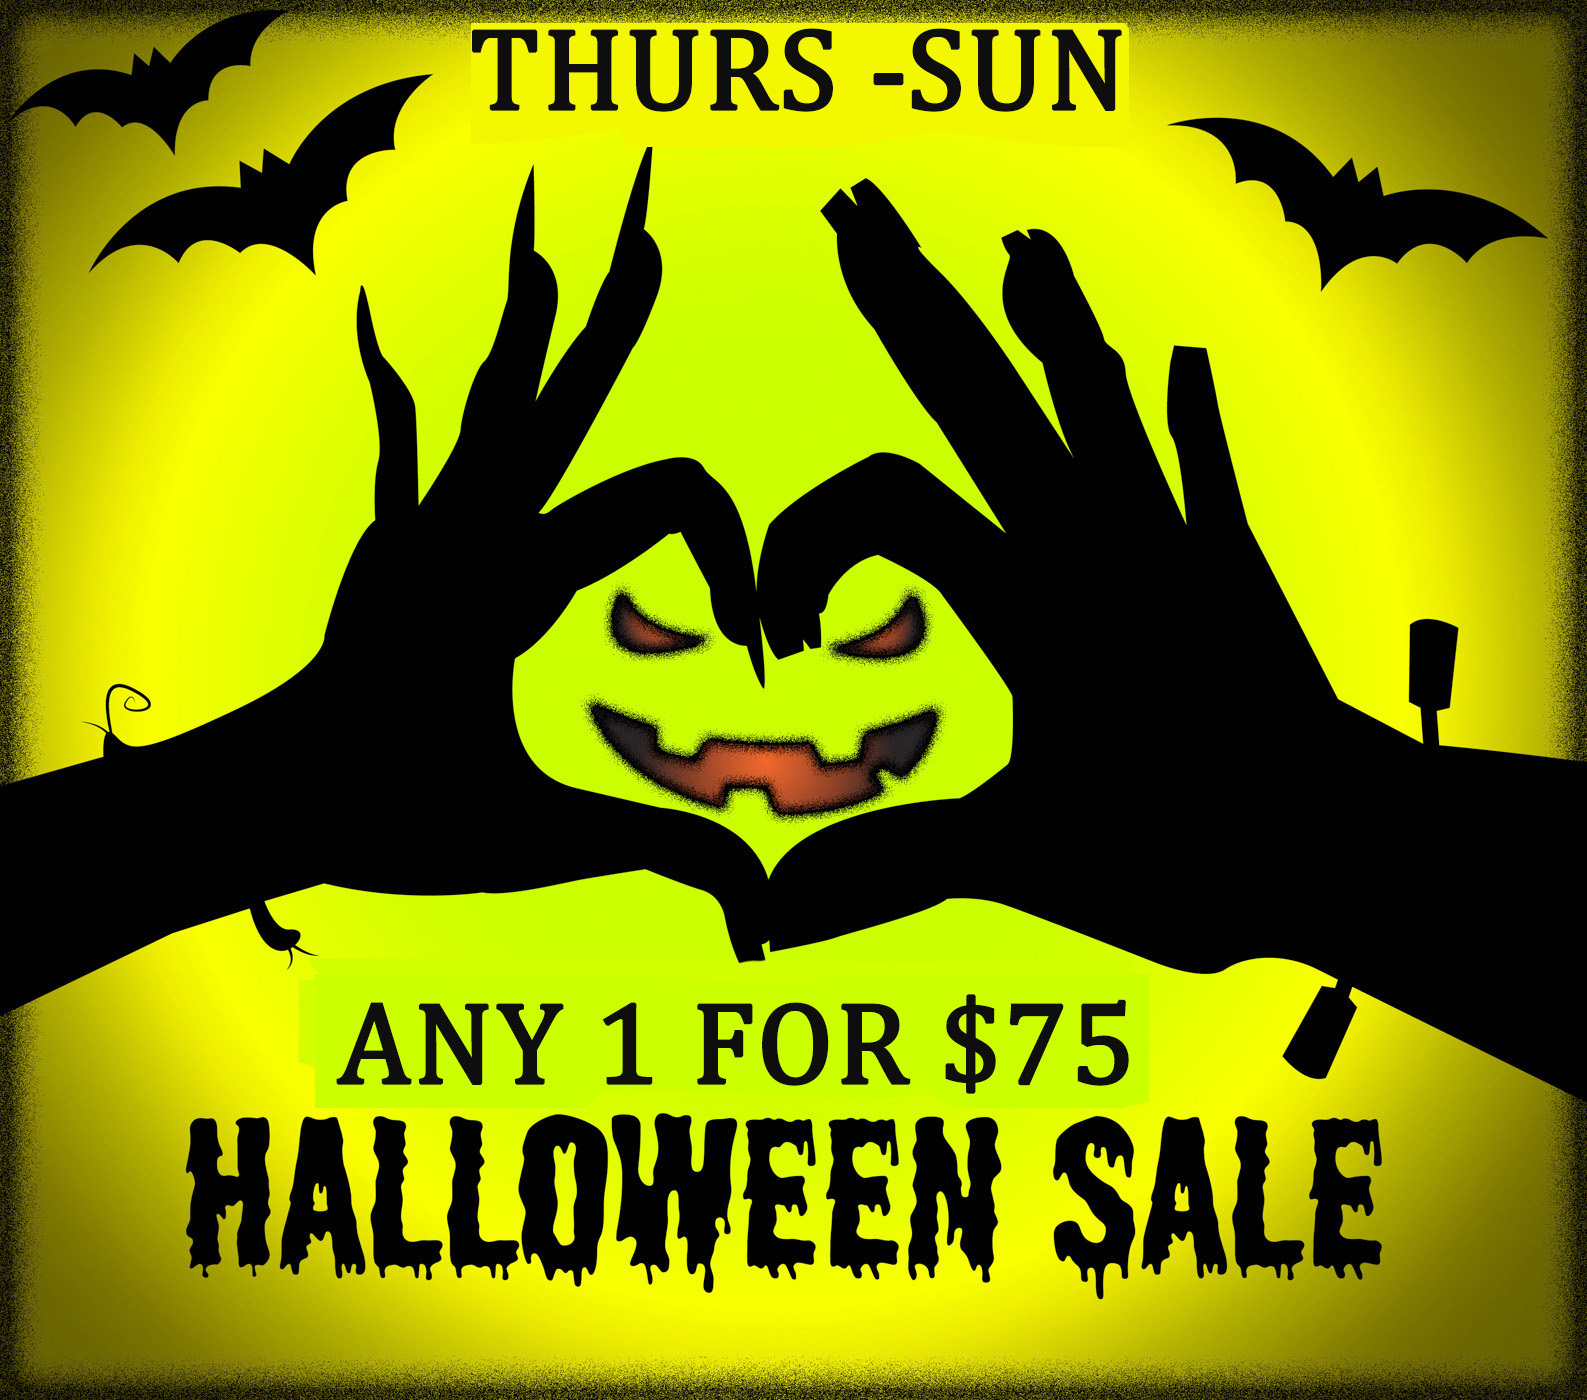 Primary image for THURS - SUN  HALLOWEEN FLASH SALE! PICK ANY 1 FOR $75  BEST OFFERS DISCOUNT